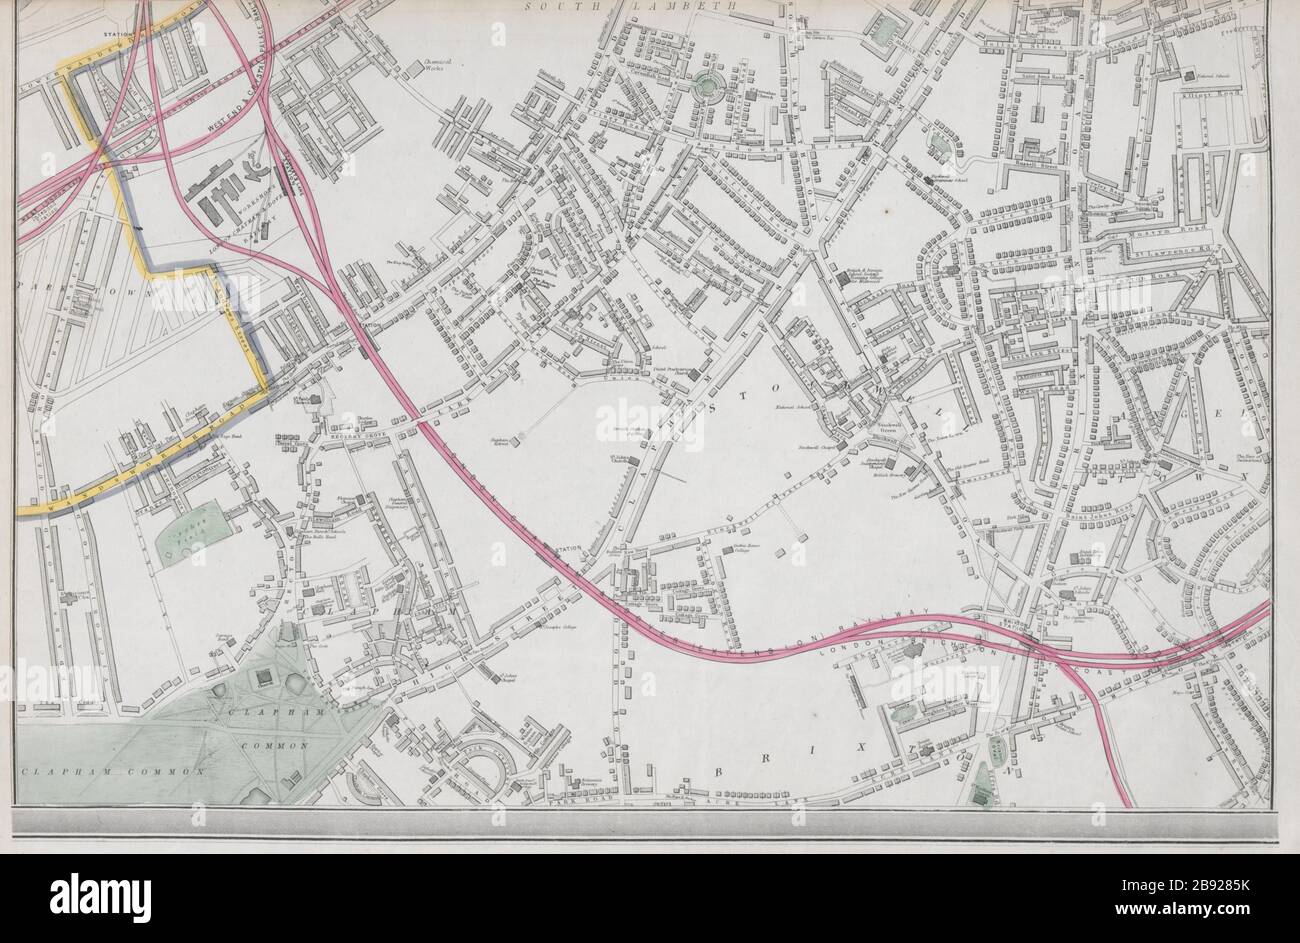 SOUTH LONDON. Stockwell Clapham North/Common Brixton Battersea. WELLER 1868 map Stock Photo